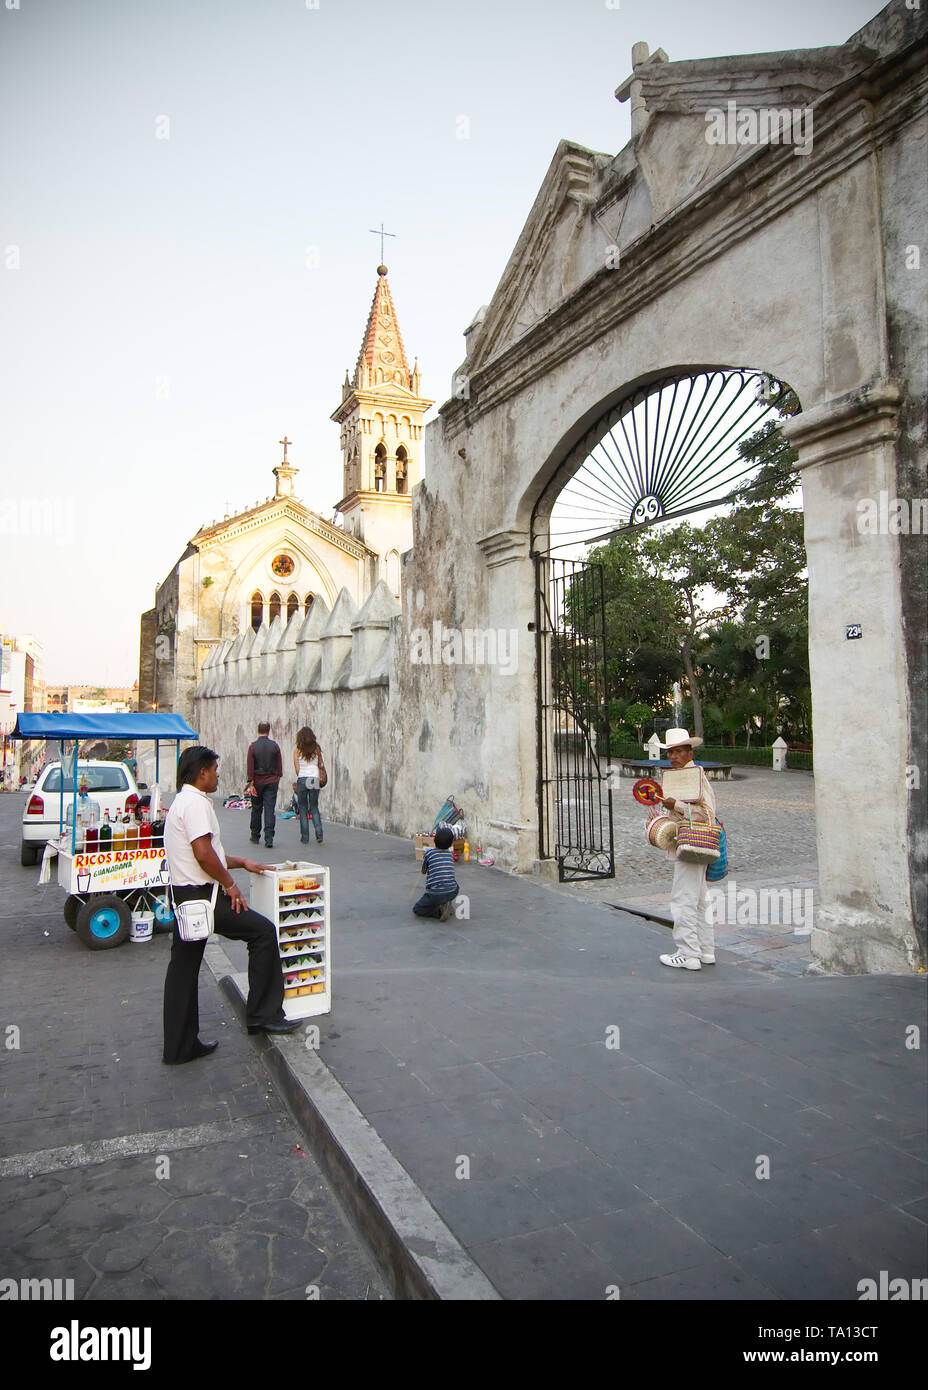 Cuernavaca, Morelos, Mexico - 2019: People sell local products in front of a chapel and the Cathedral La Asuncion. Stock Photo